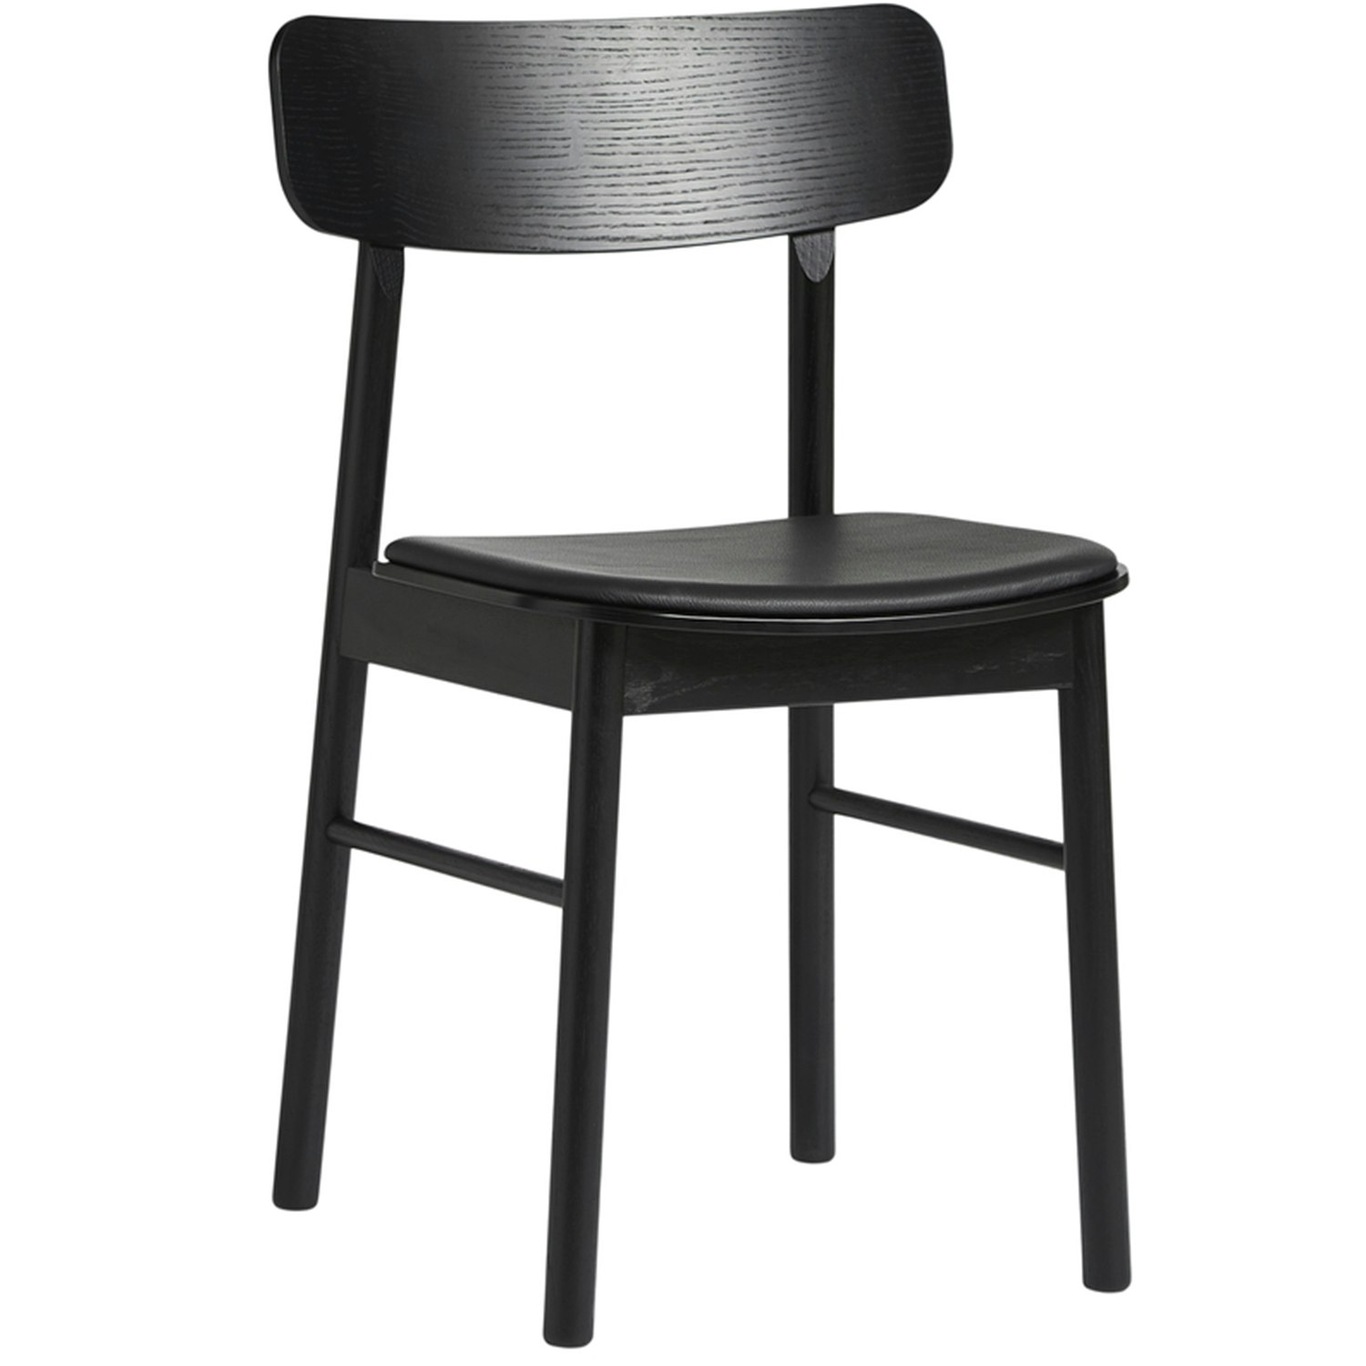 Soma Dining Chair, Black Leather / Black Painted Ash